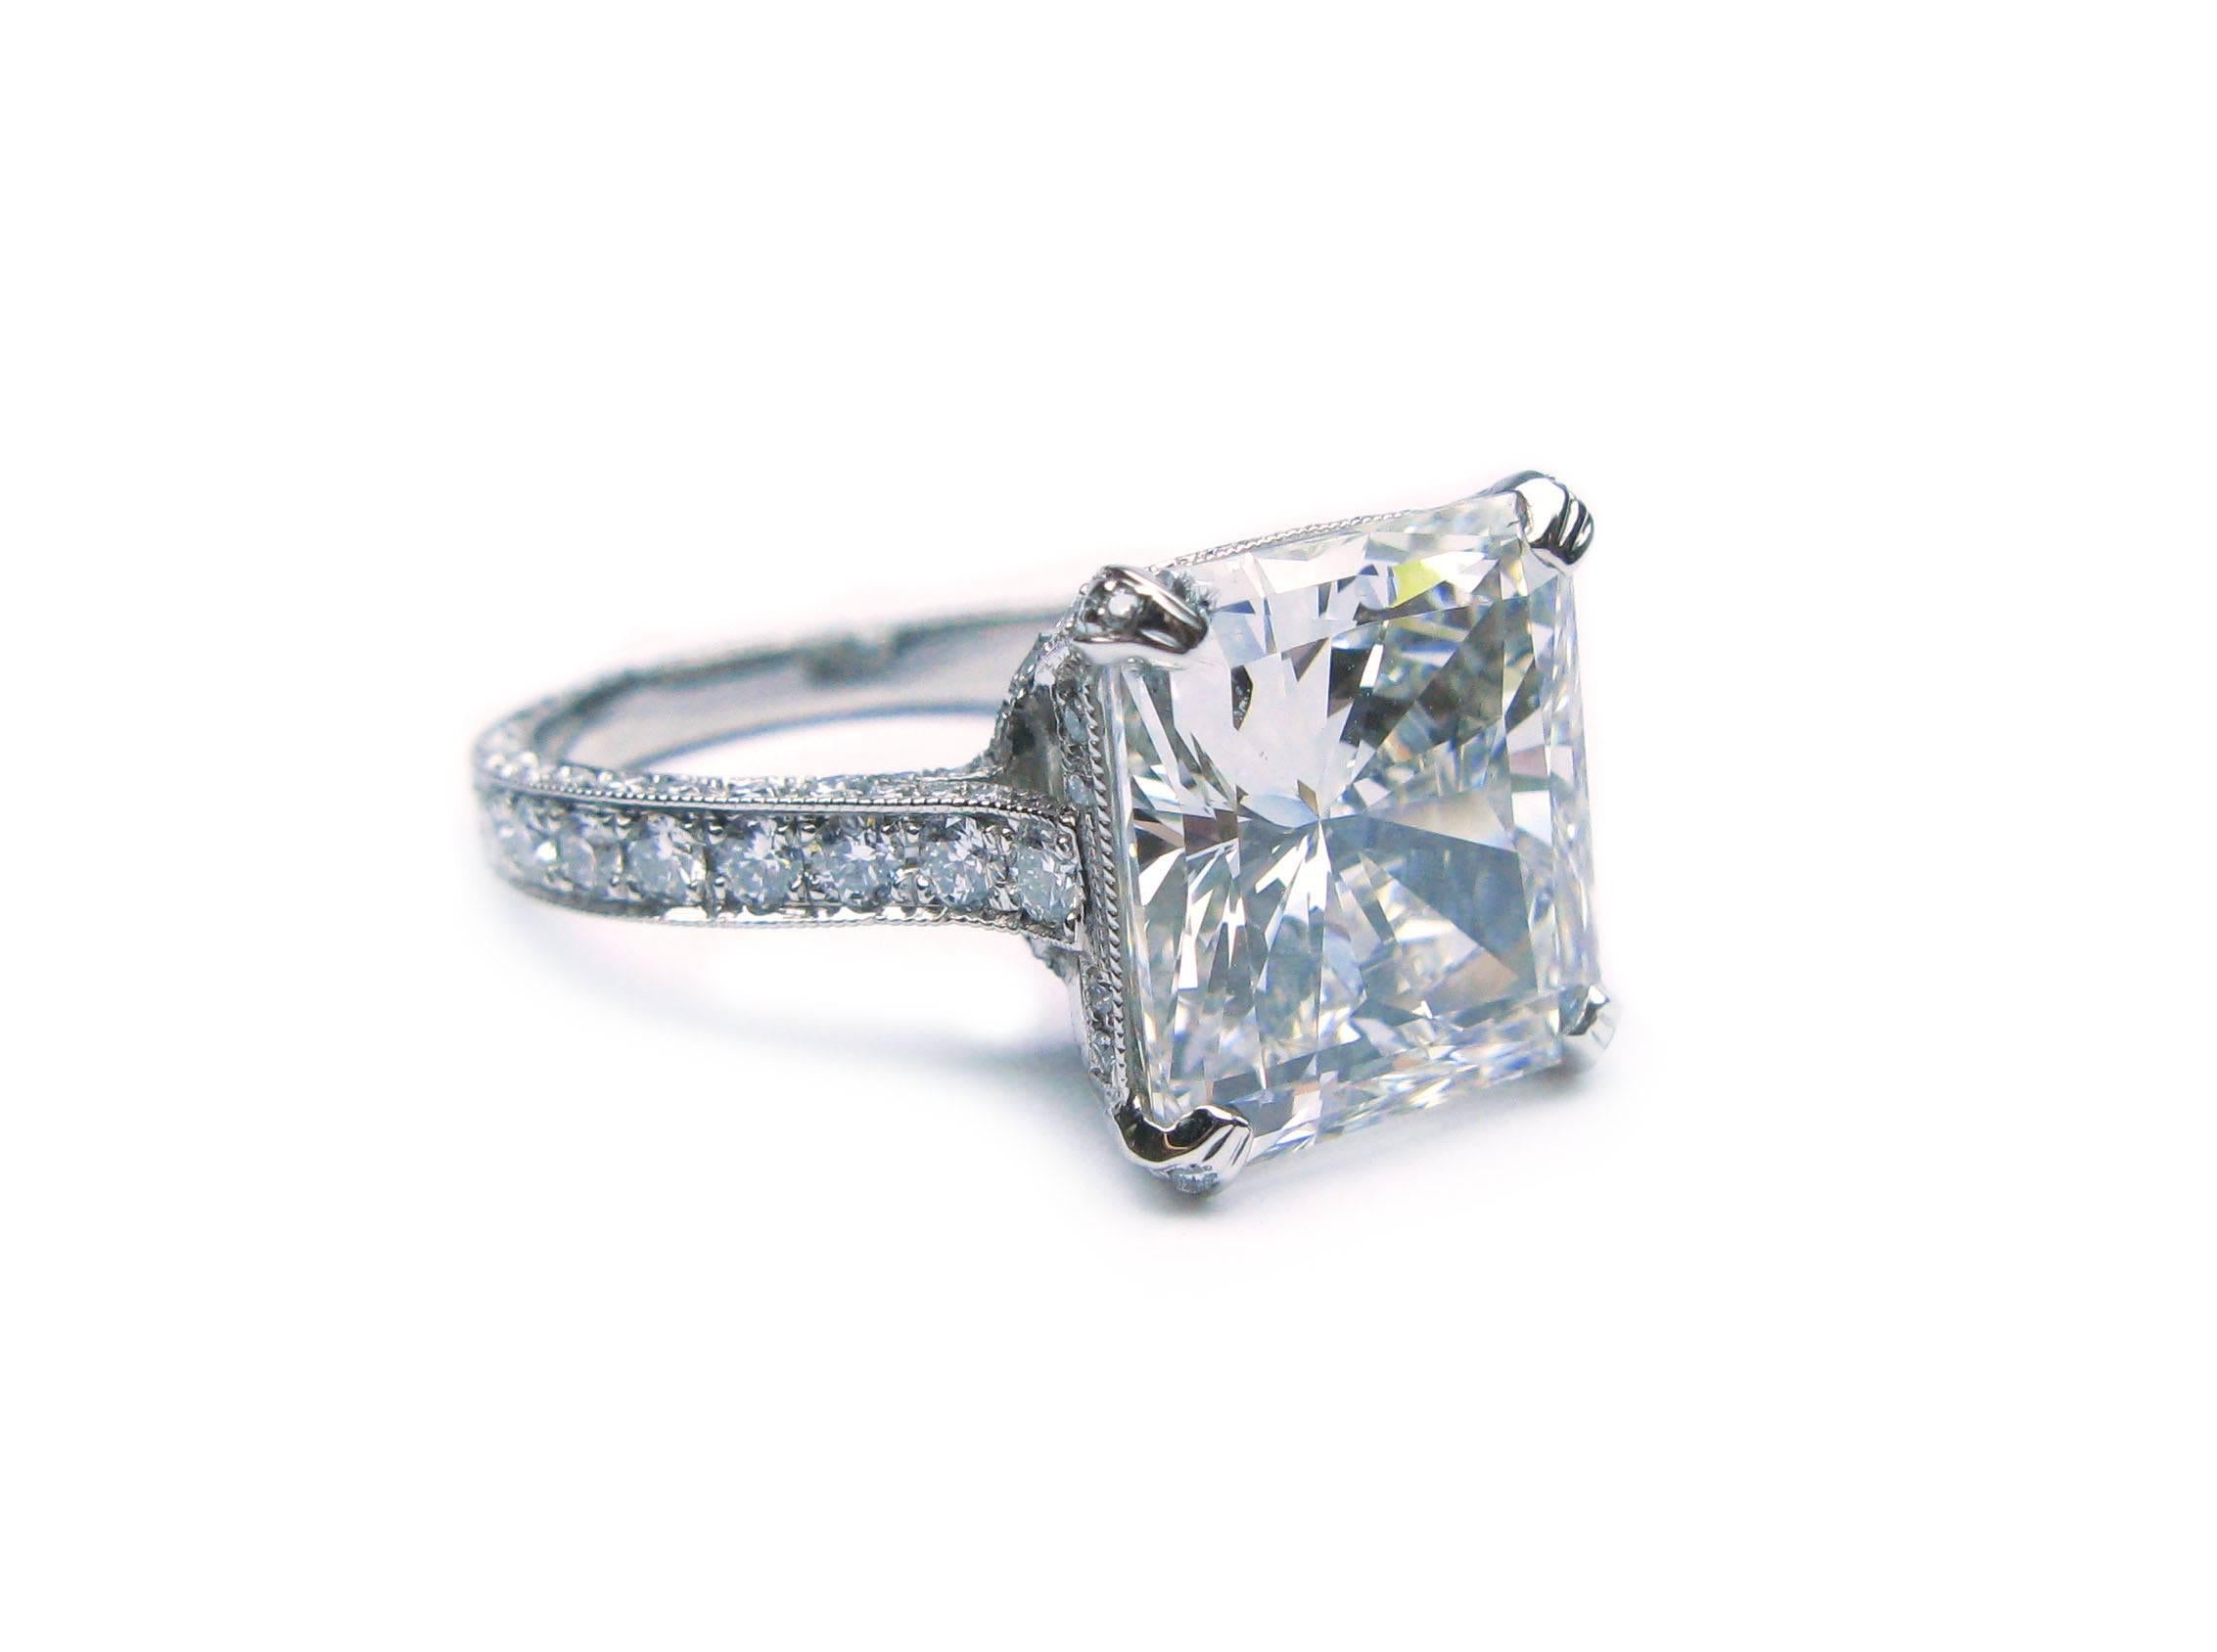 This spectacular handmade platinum engagement ring features a sparkling GIA certified 6.14ct, H color, VS1 clarity, Radiant diamond center stone set with approximately 2.00ctw of pave set round brilliant diamonds around the head and in the band.